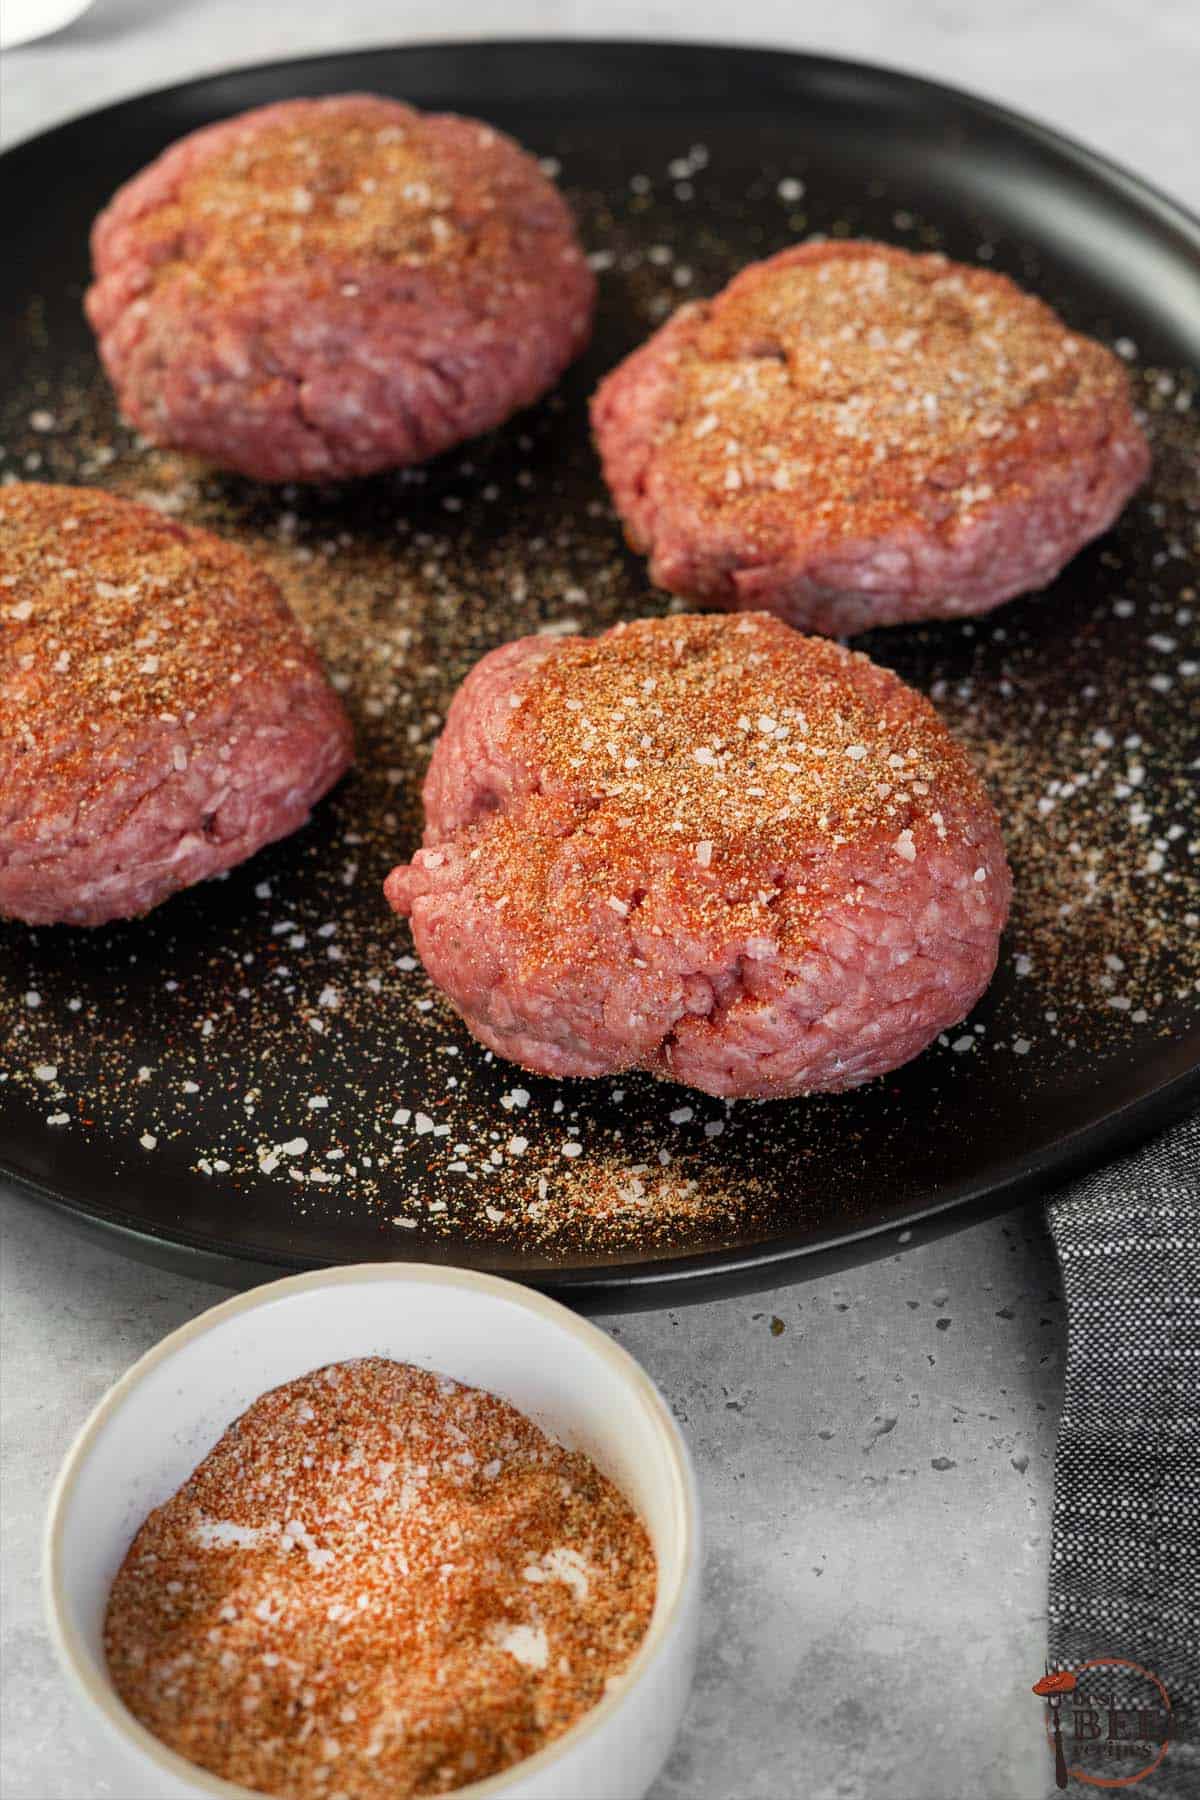 How To Season Ground Beef For Burgers?